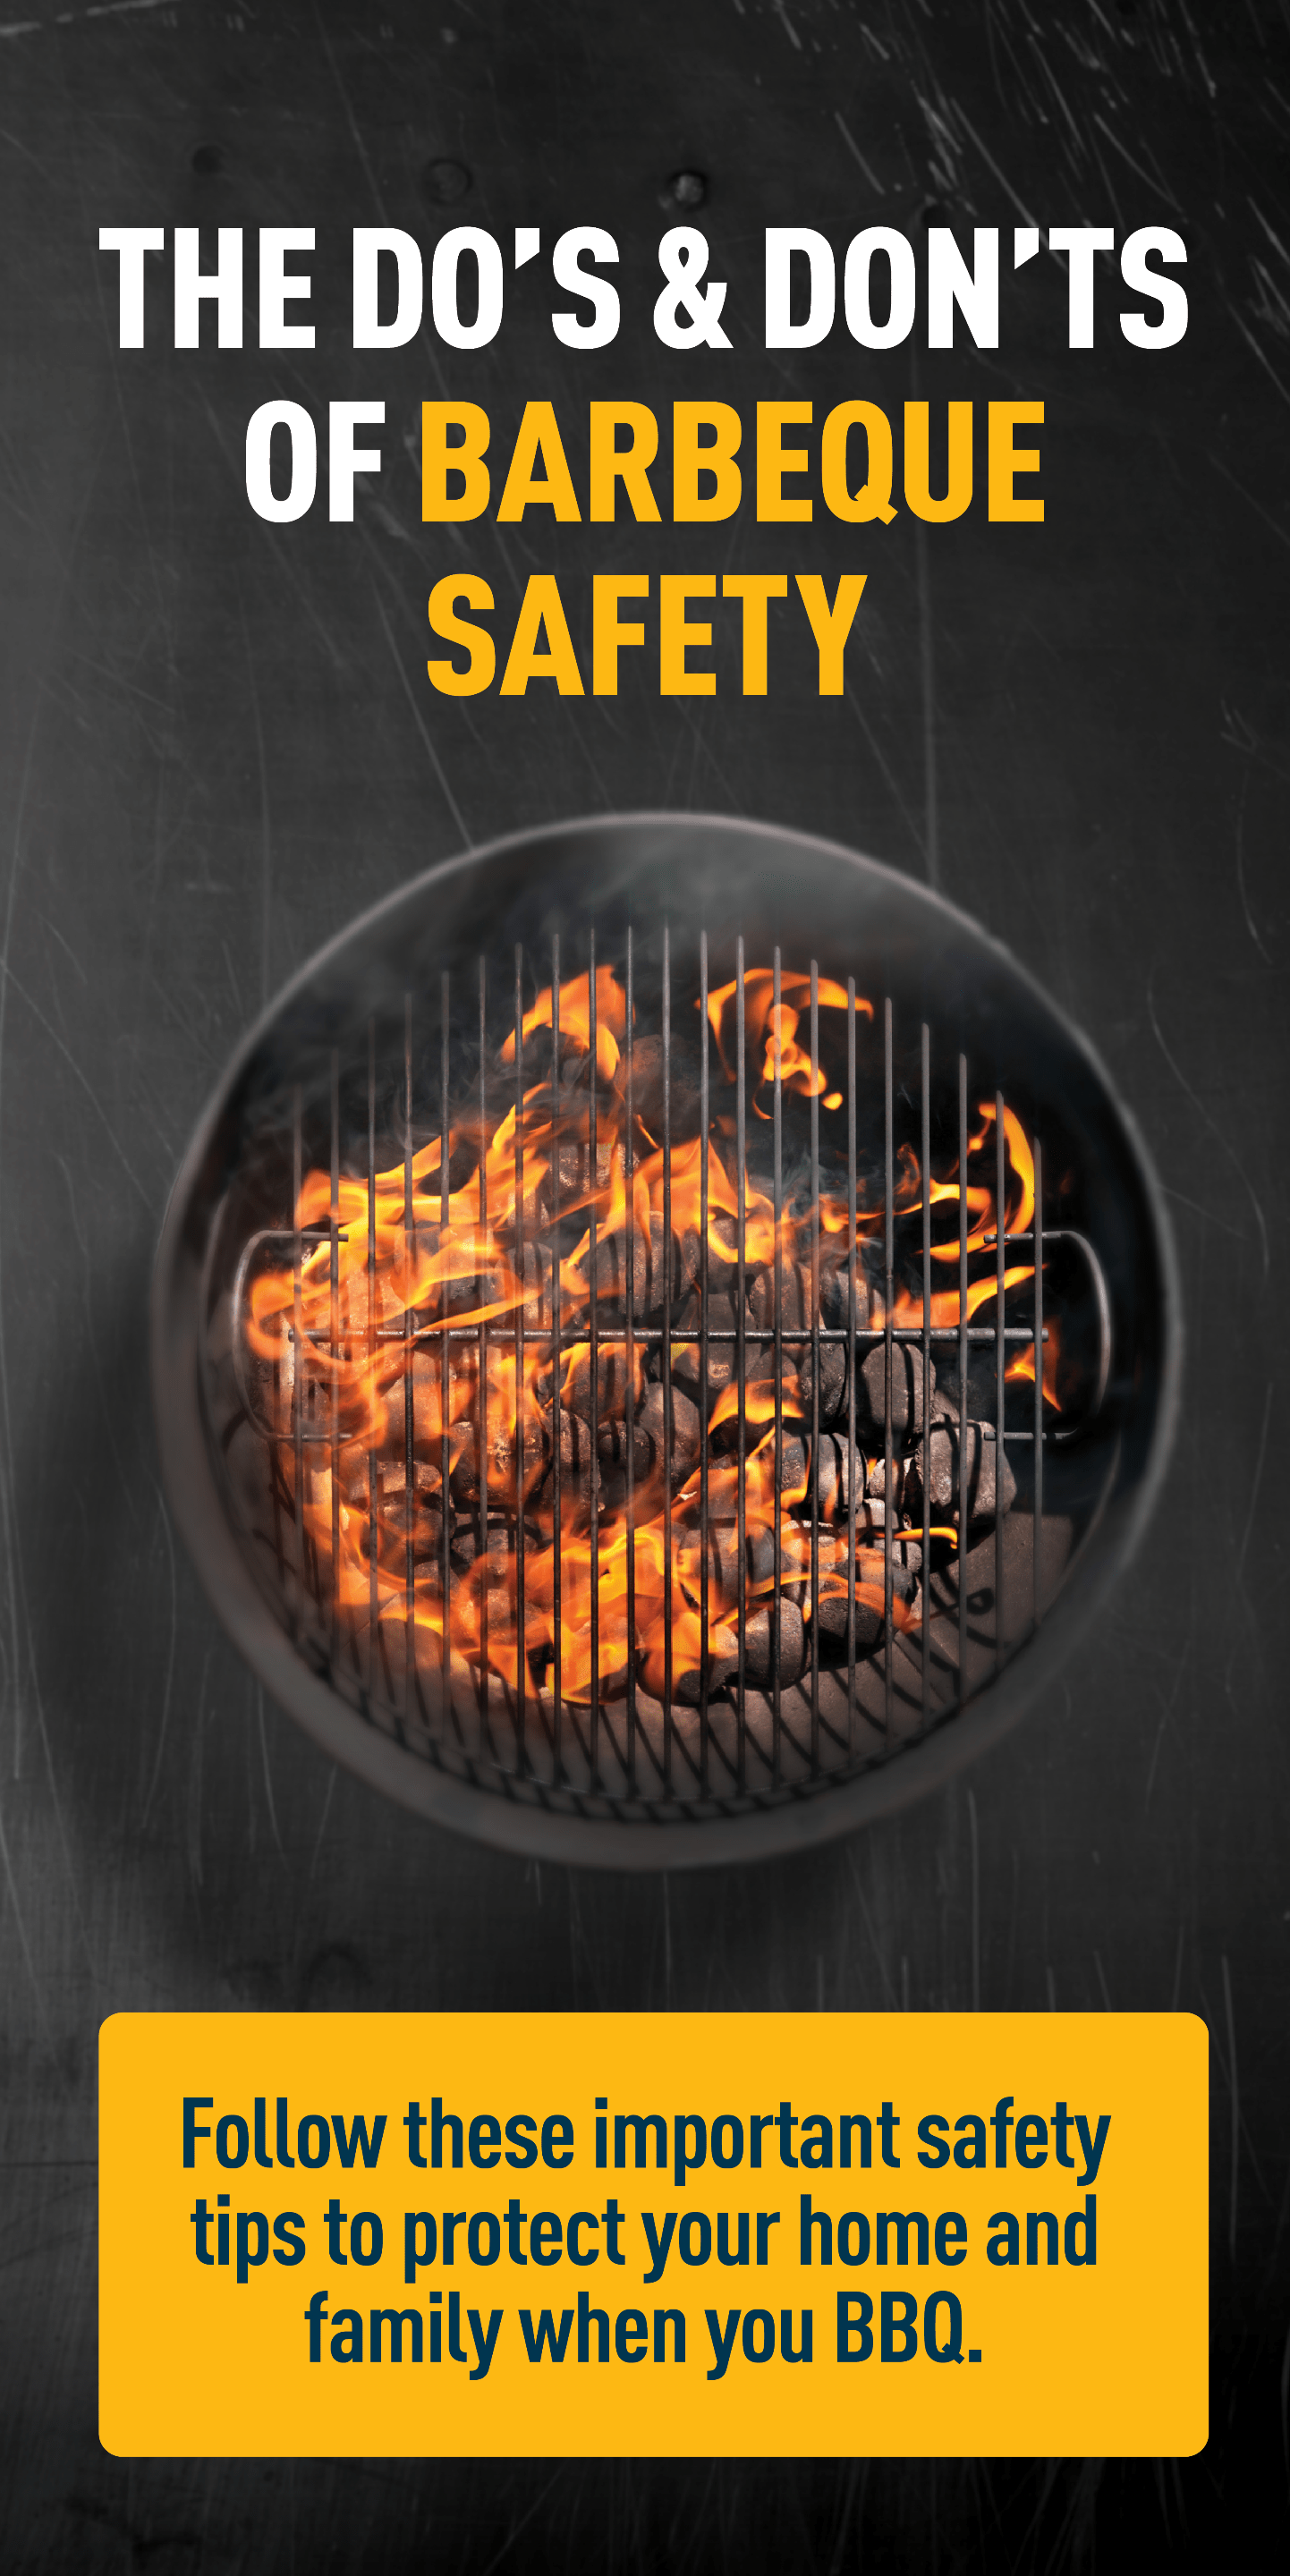 Image Description: Image of charcoal barbecue with flames. Text: THE DO'S & DON'TS OF BARBEQUE SAFETY. Follow these important safety tips to protect your home and family when you BBQ.